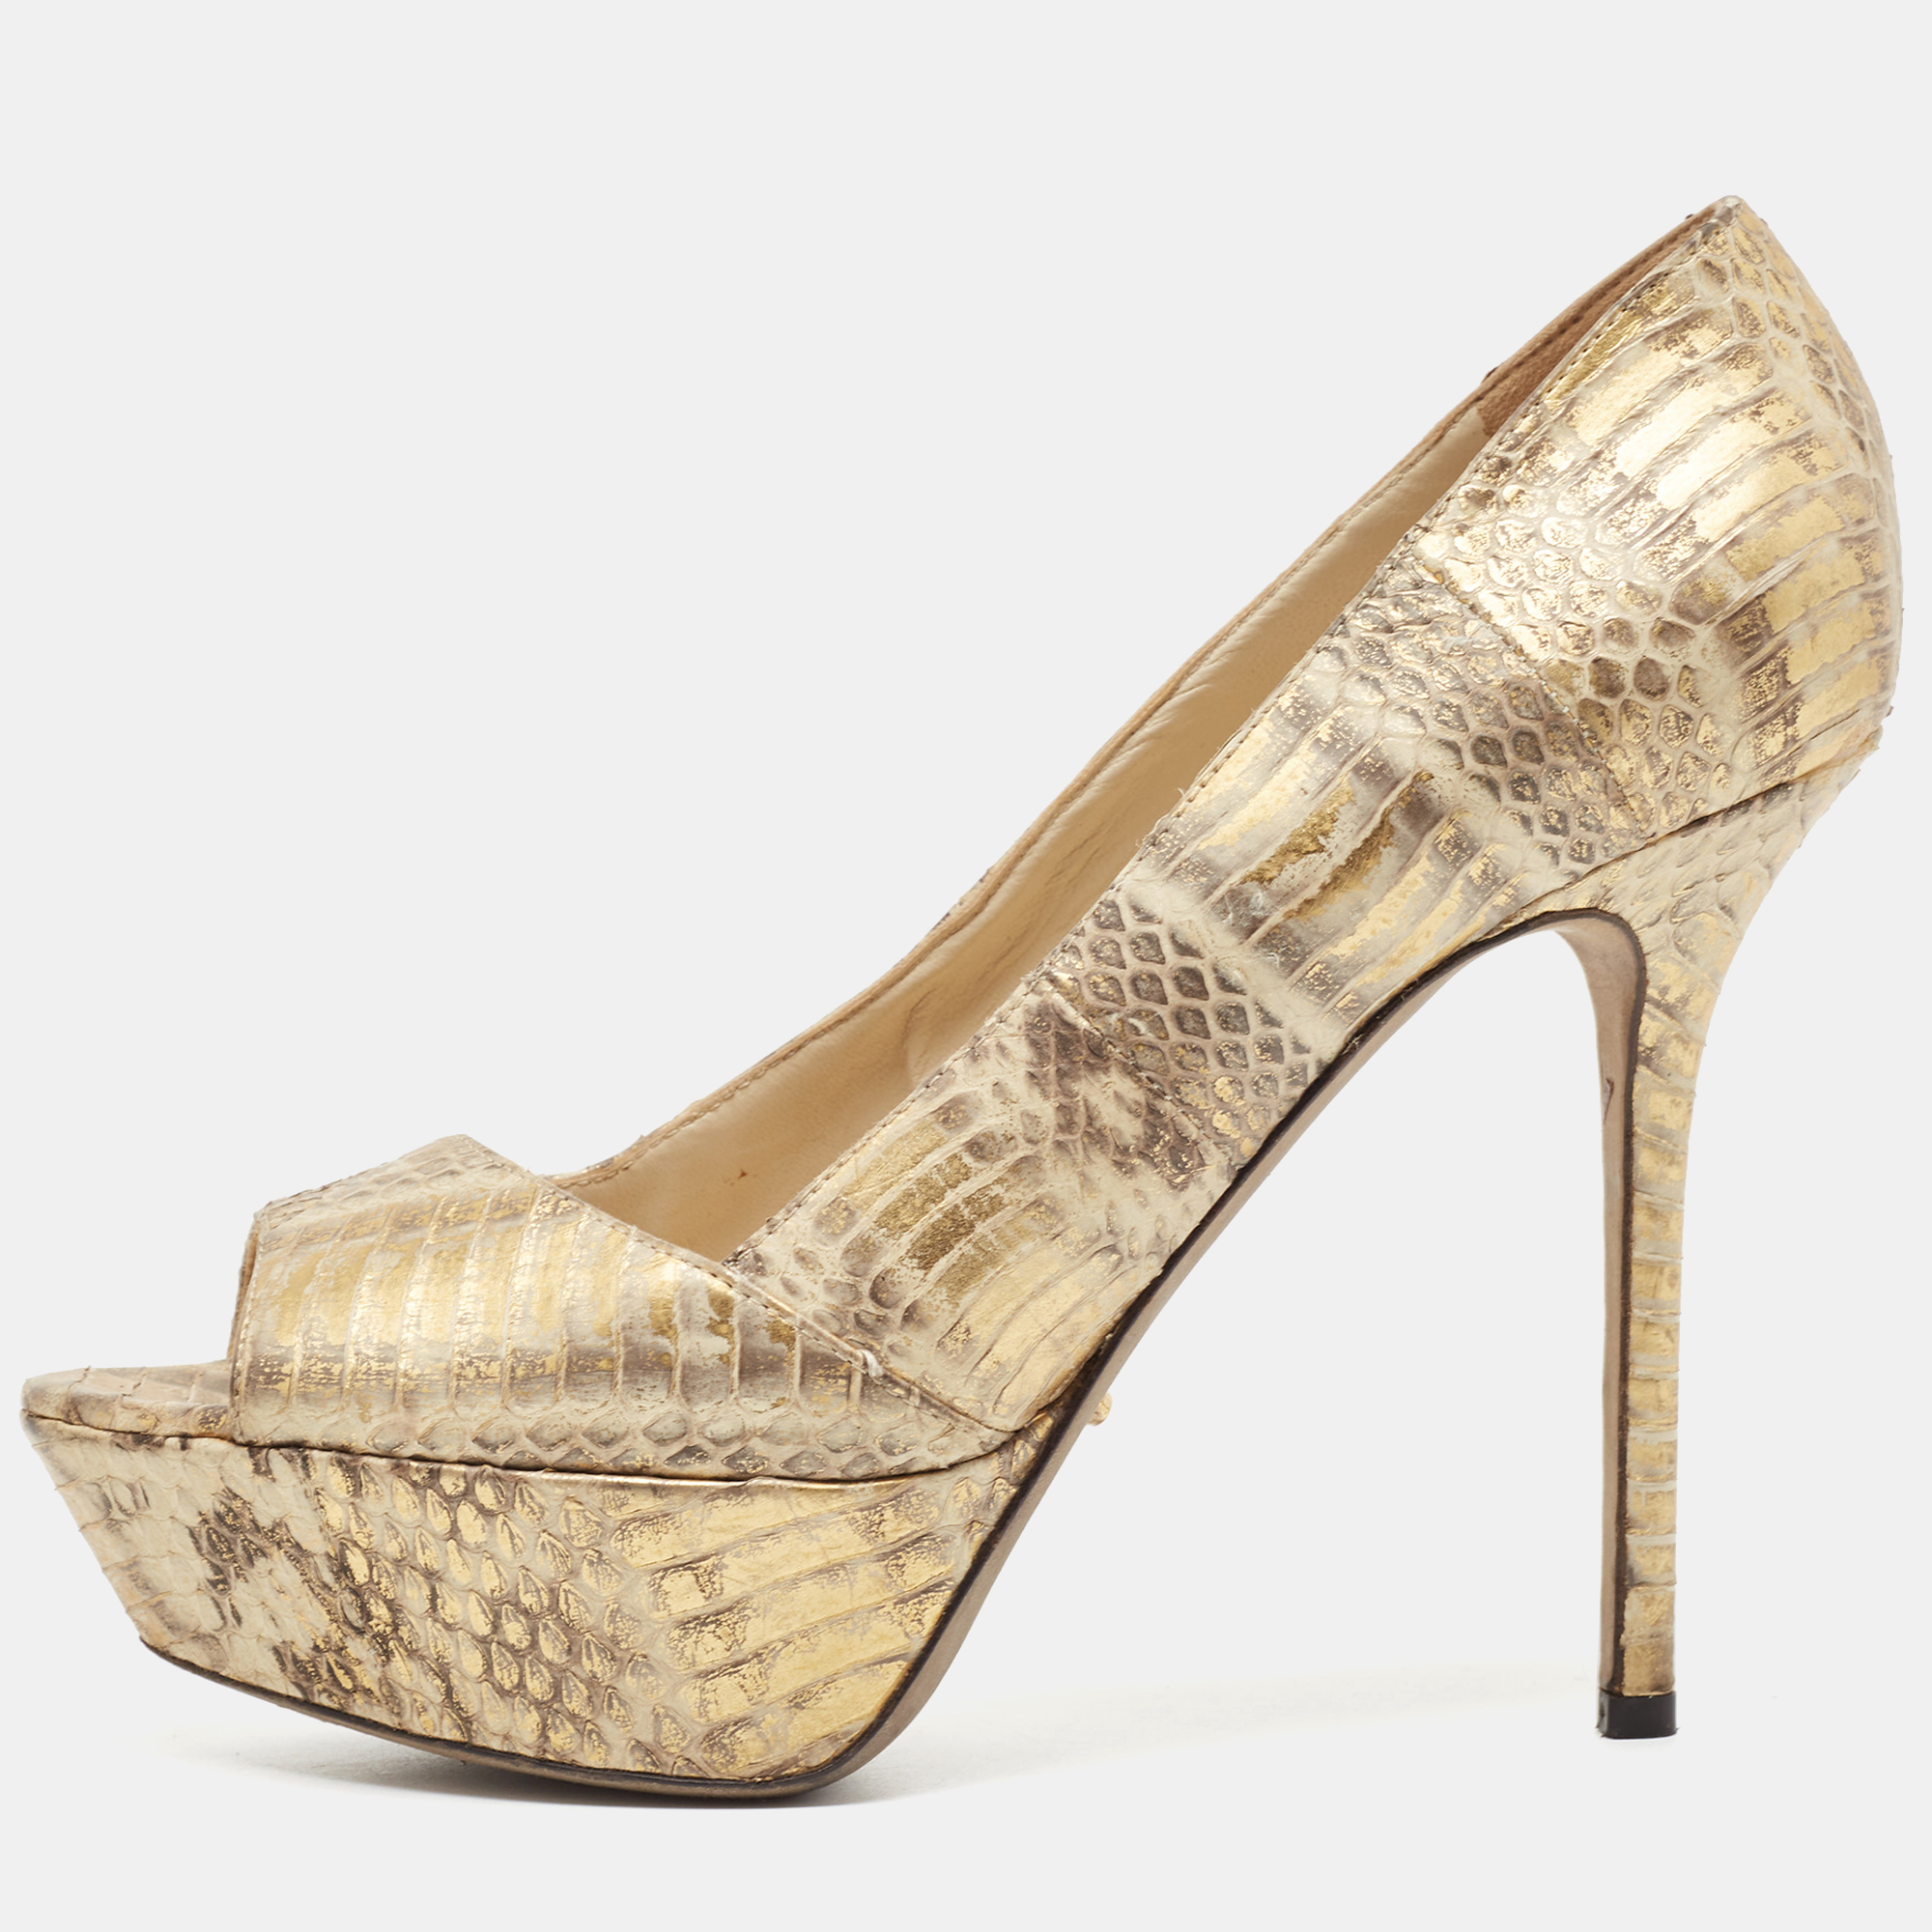 Sergio Rossi Beige/Gold Python Embossed Leather Peep Toe Pumps Size 38.5